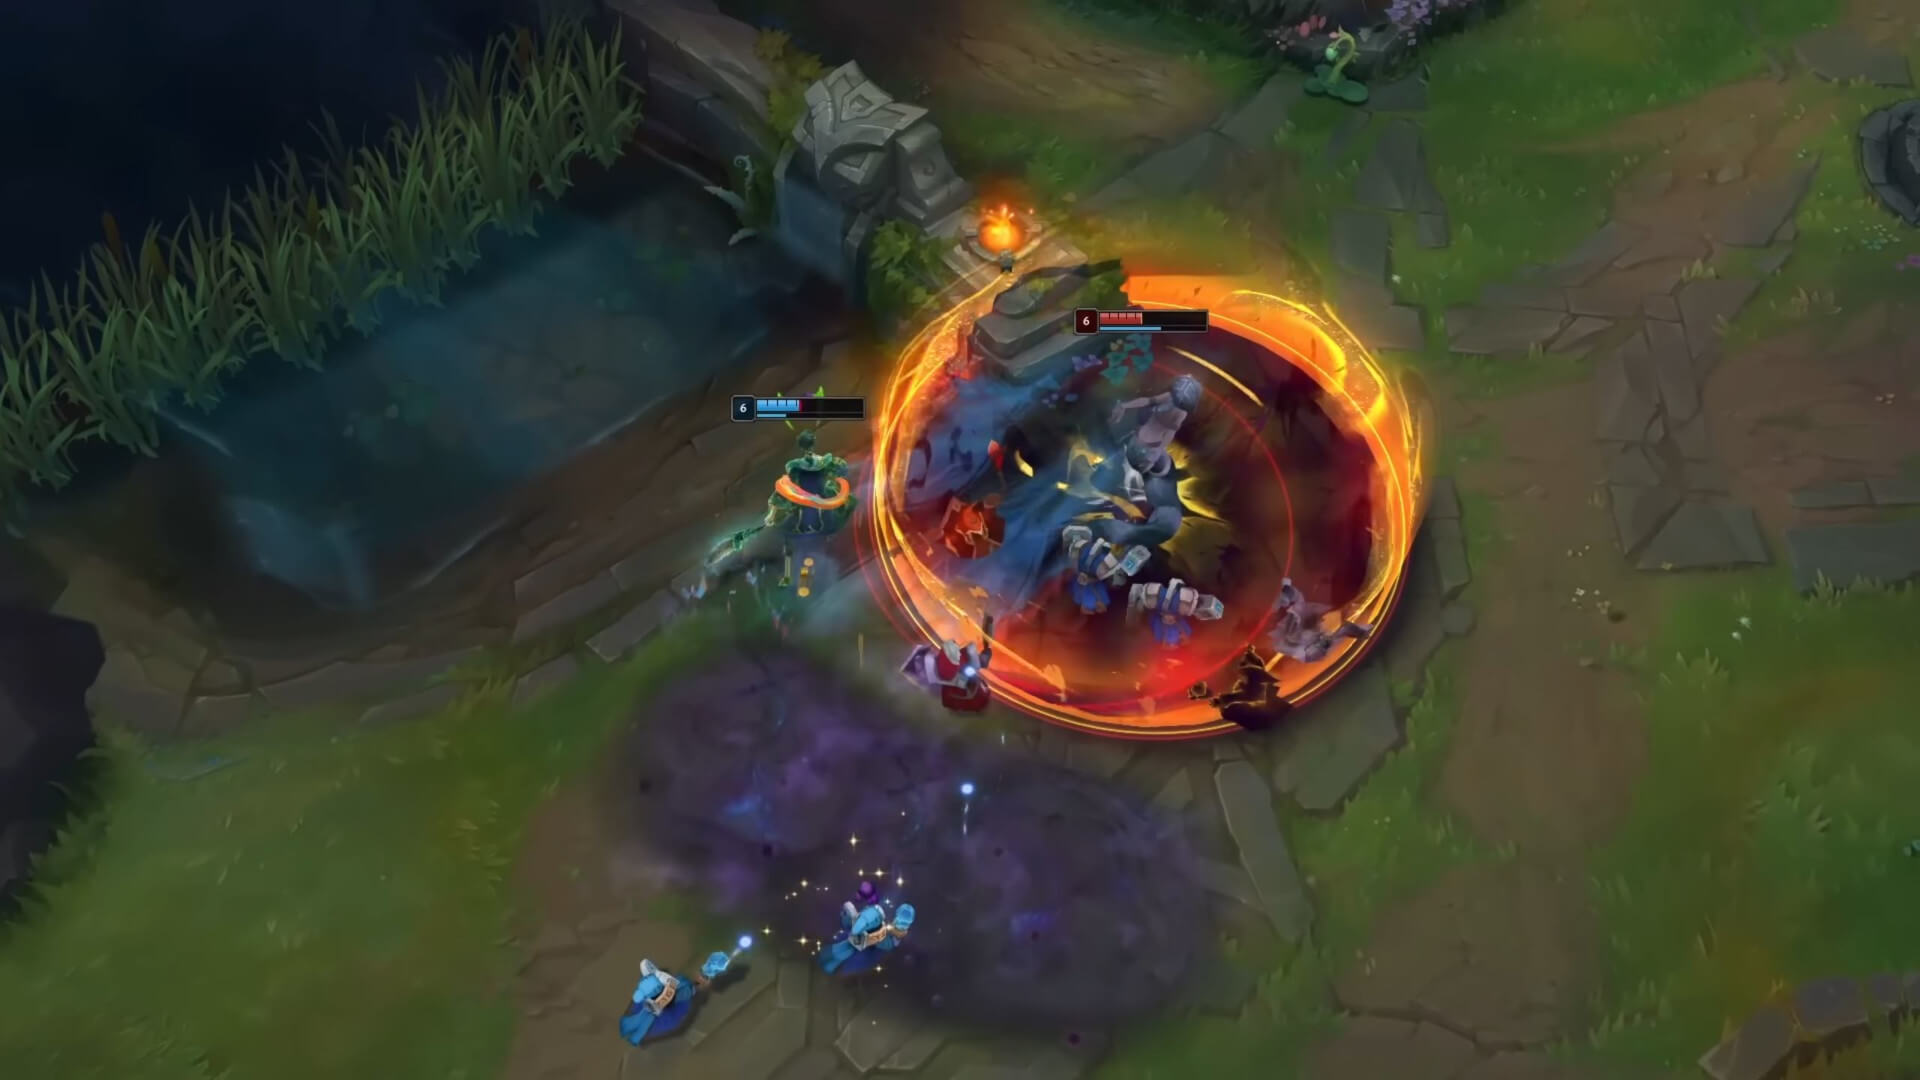 The paint mage Hwei attacking Cassiopeia in League of Legends